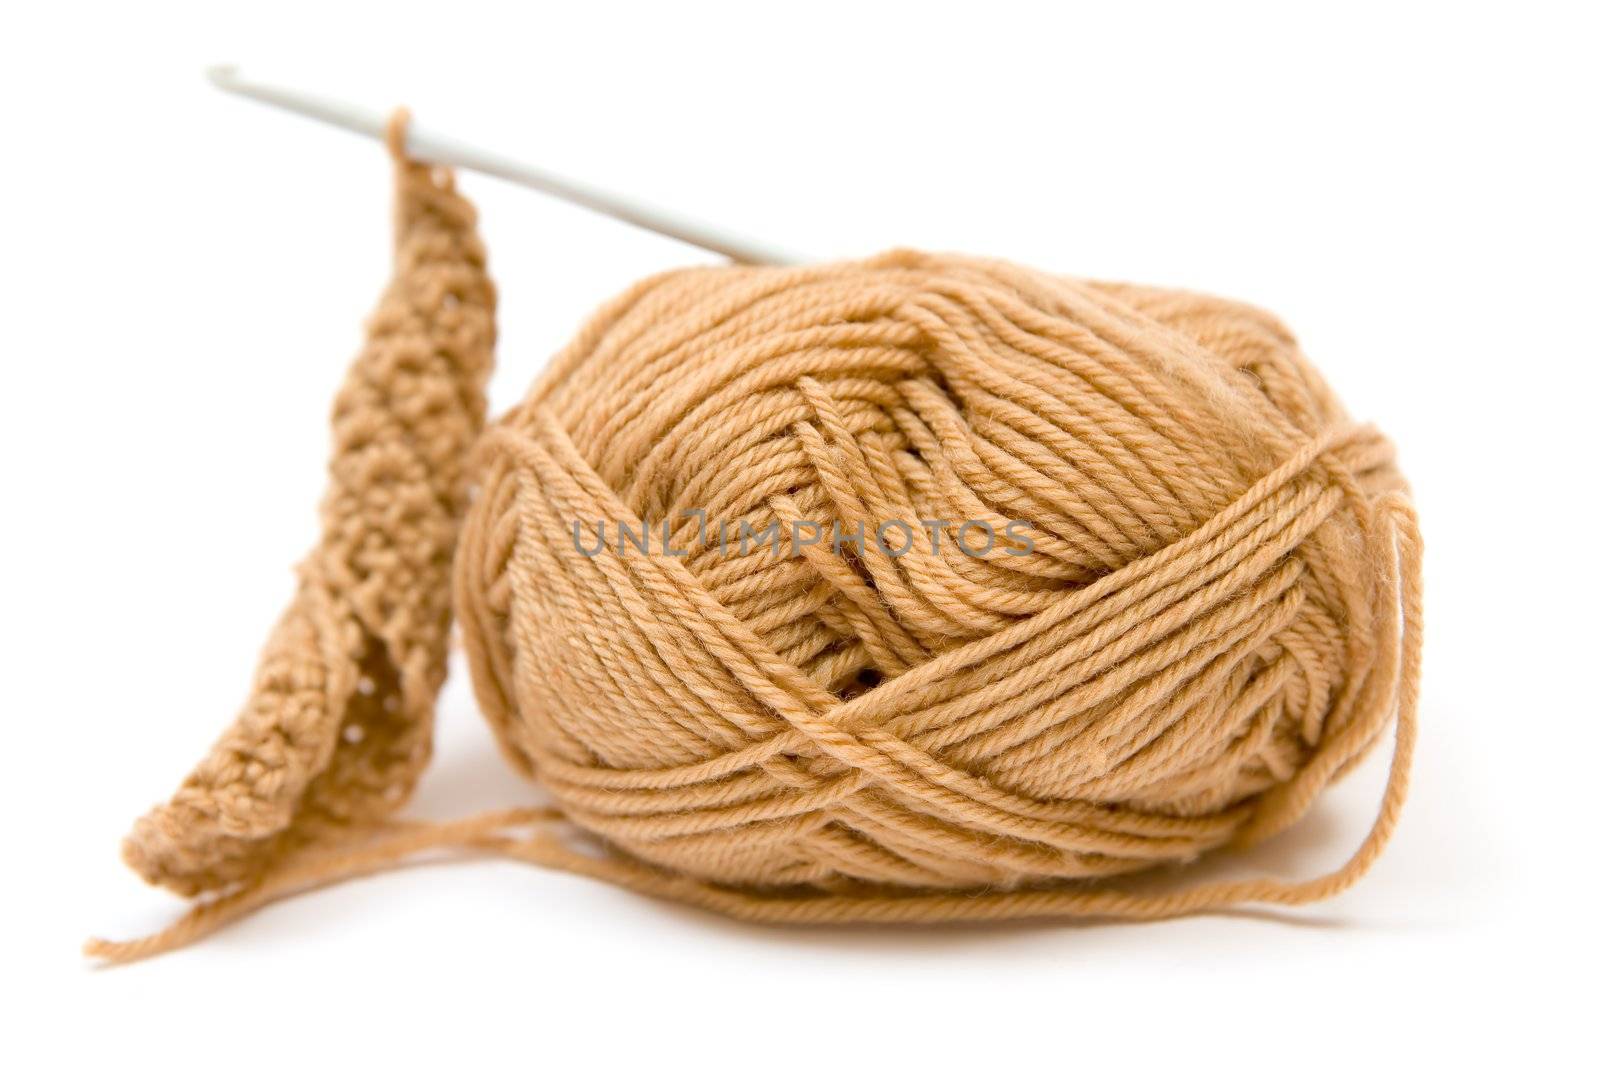 Brown yarn and crotchet hook. White background.